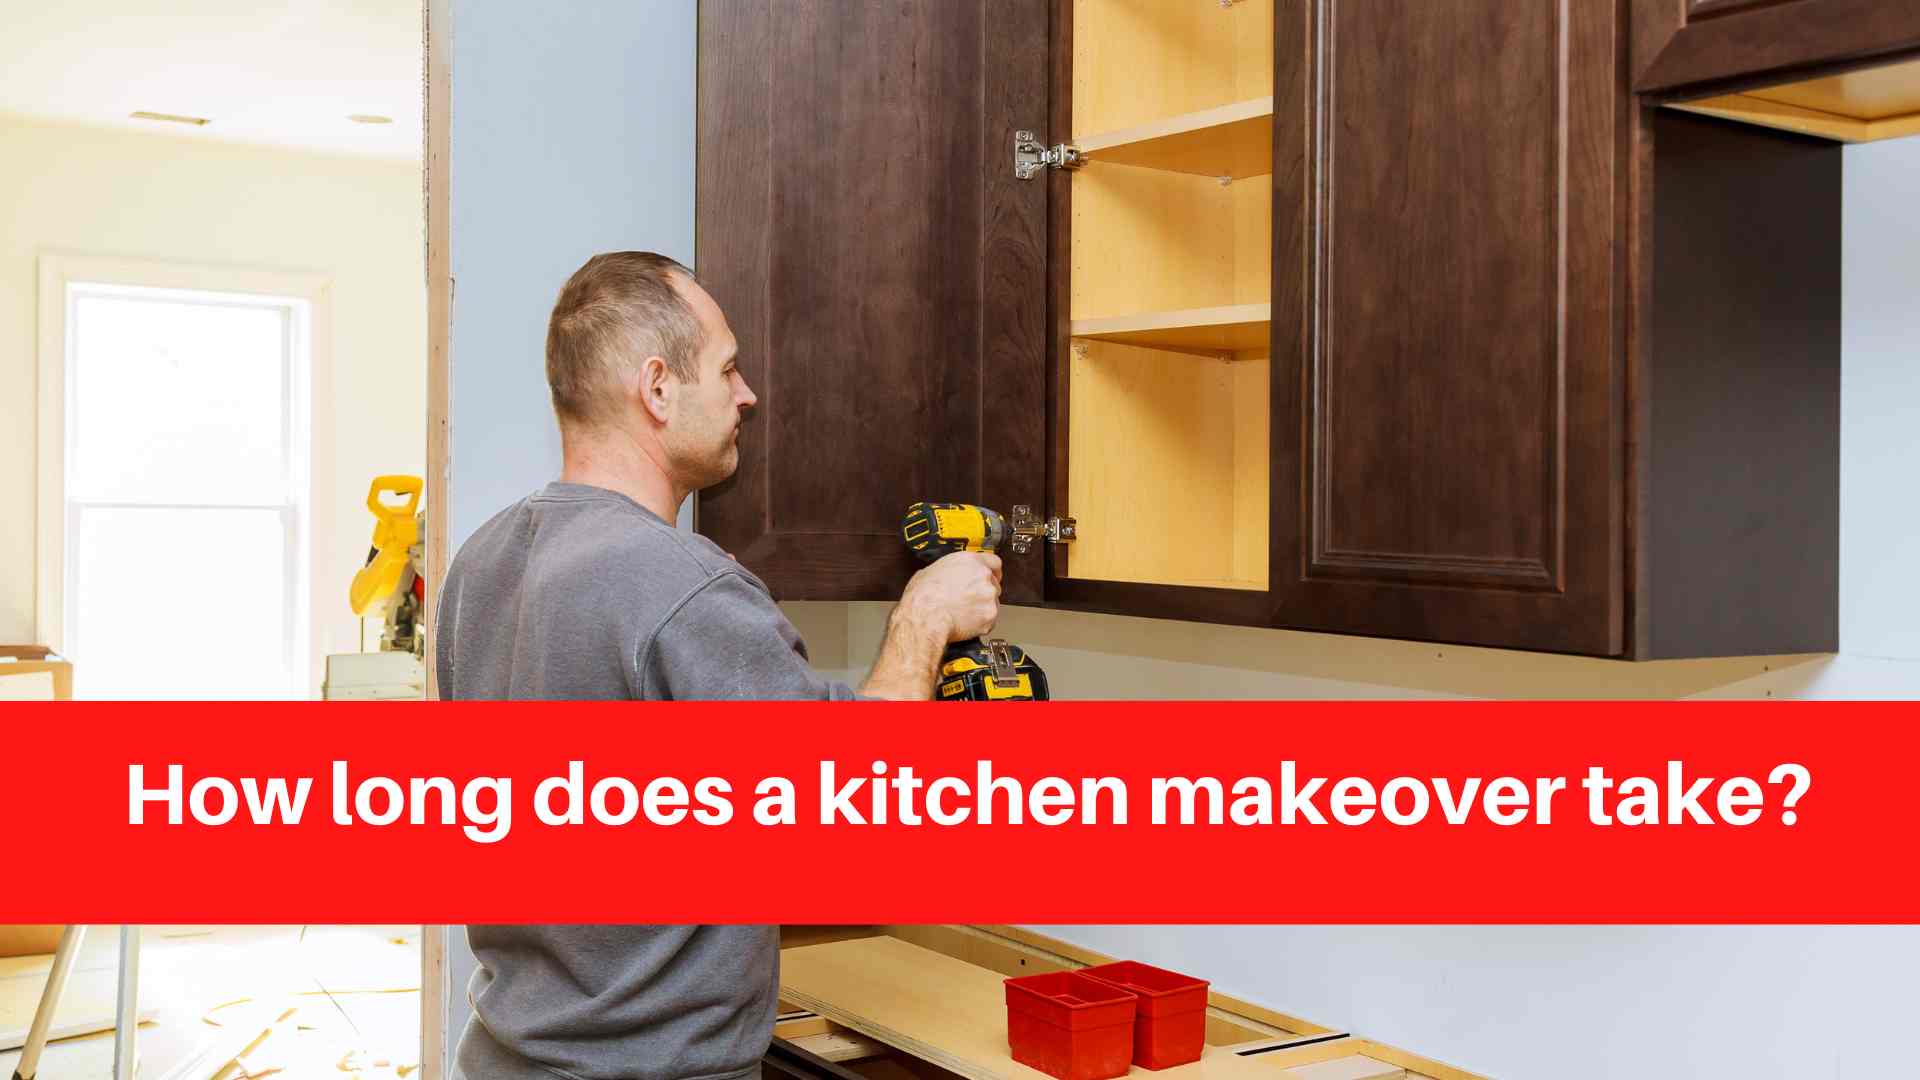 How long does a kitchen makeover take